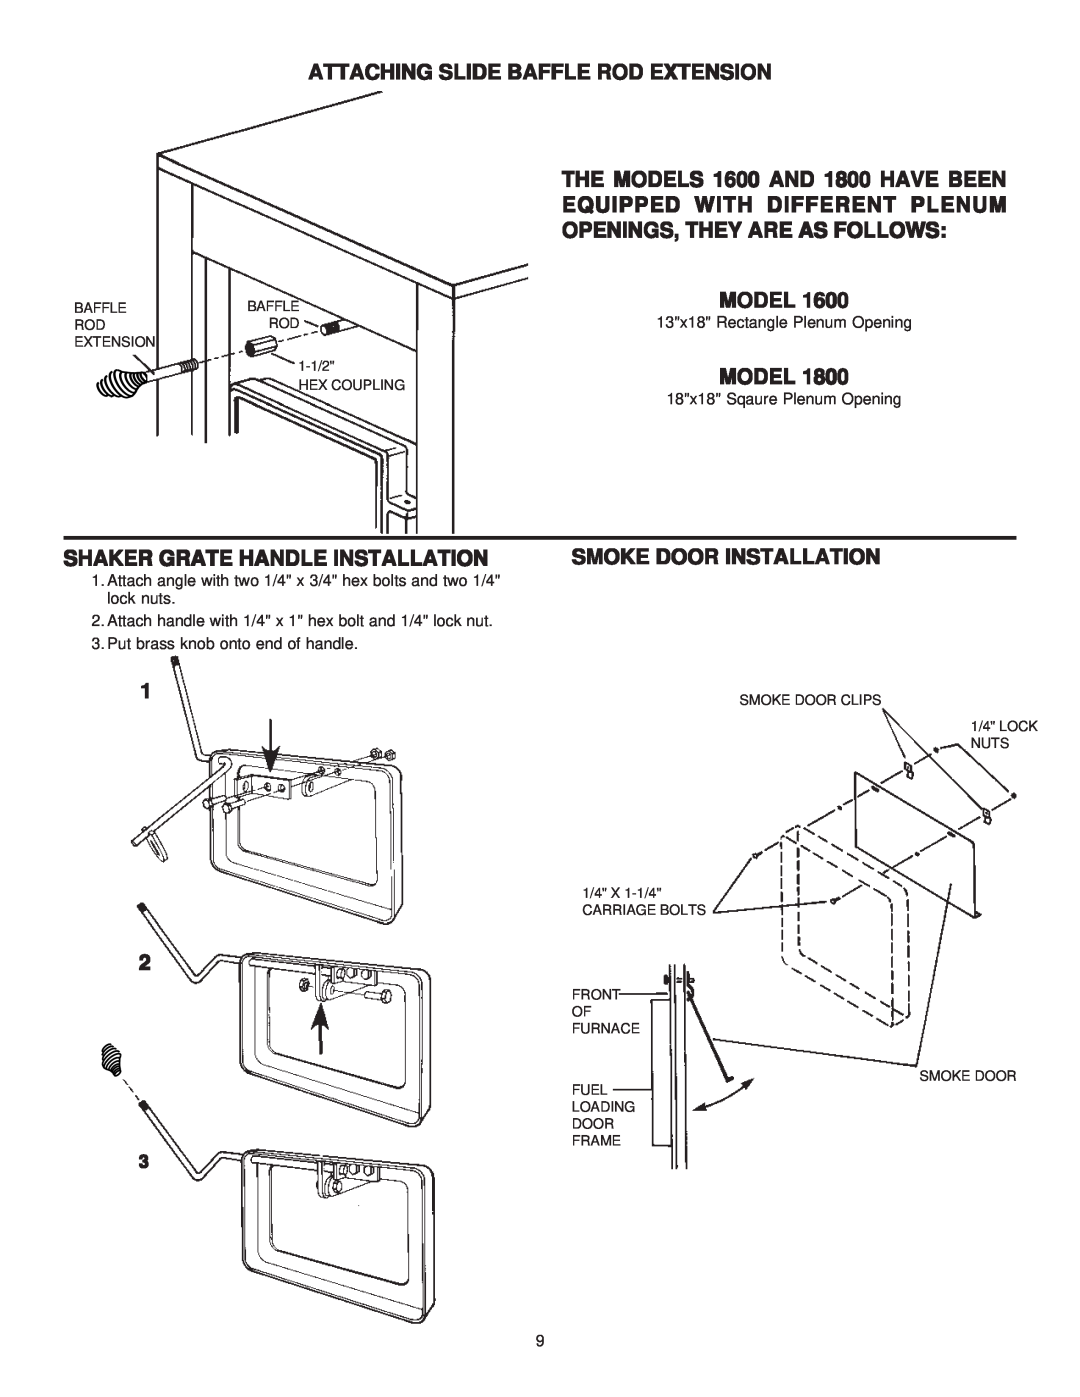 United States Stove 1800GC manual Attaching Slide Baffle Rod Extension, Model, Shaker Grate Handle Installation 